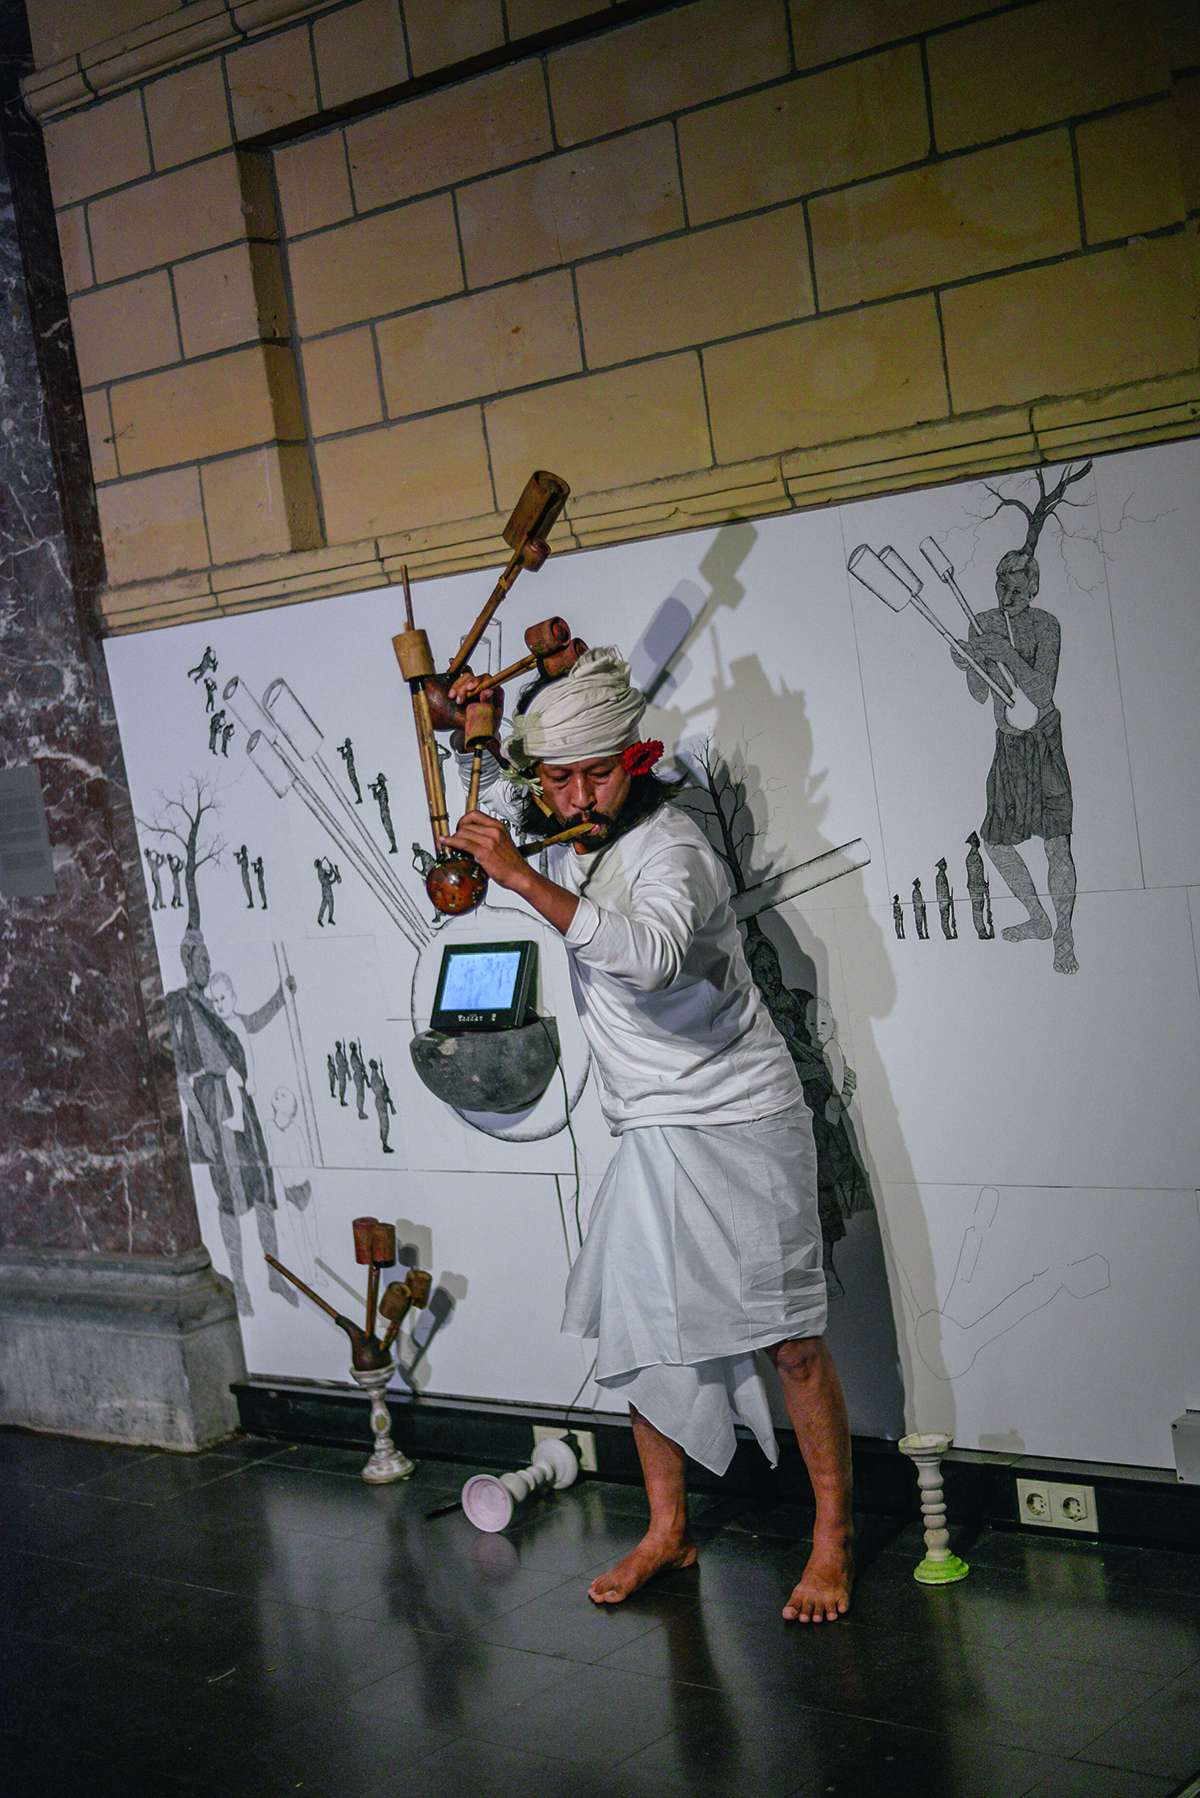 A man playing a sitar in a white outfit in front of an artwork